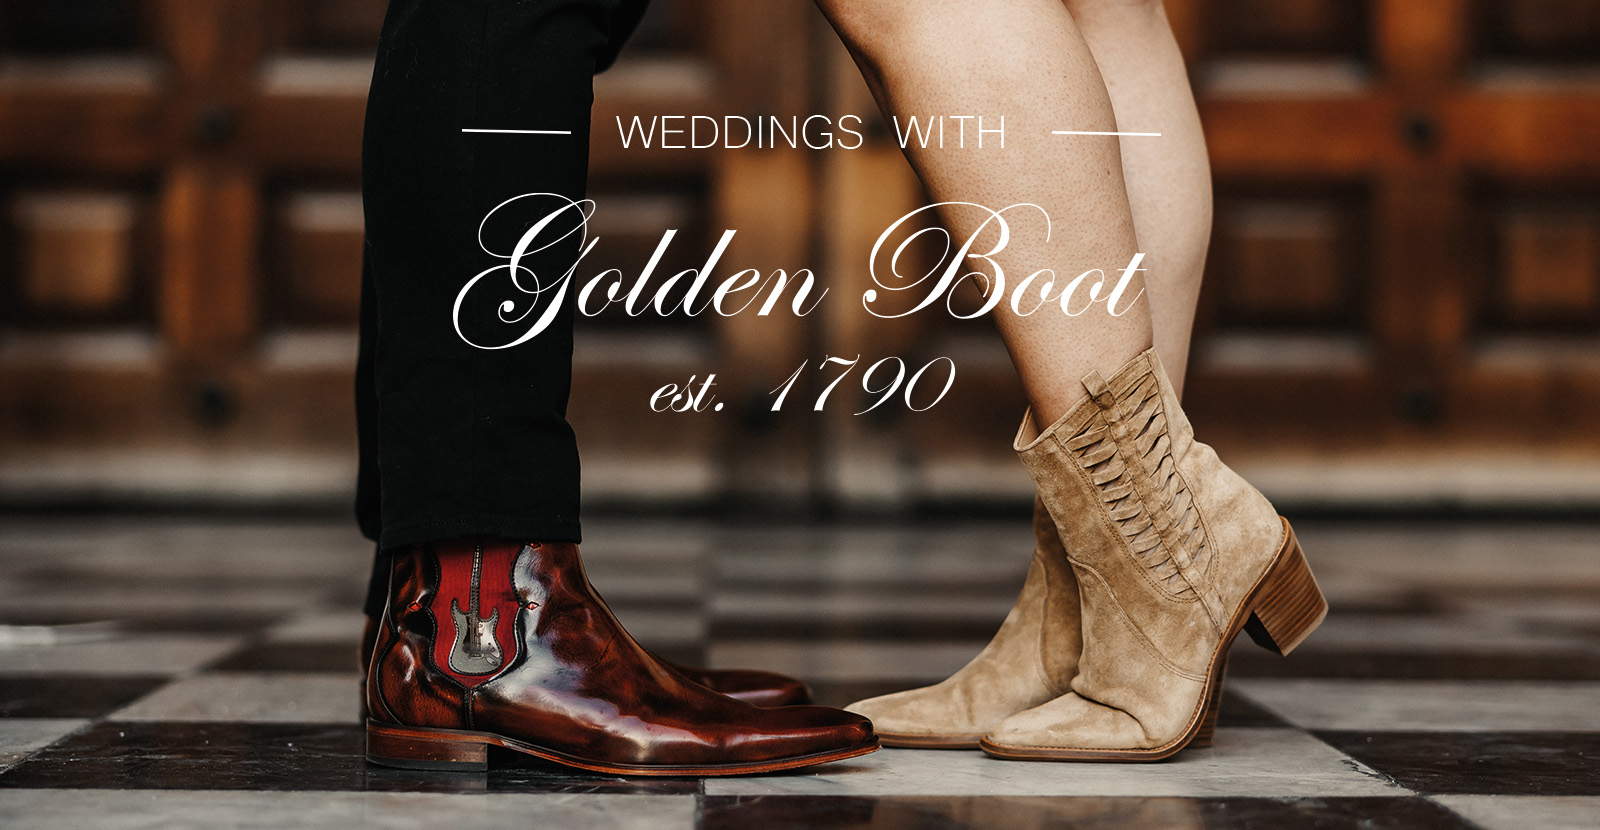 Wedding shoes at the Golden Boot